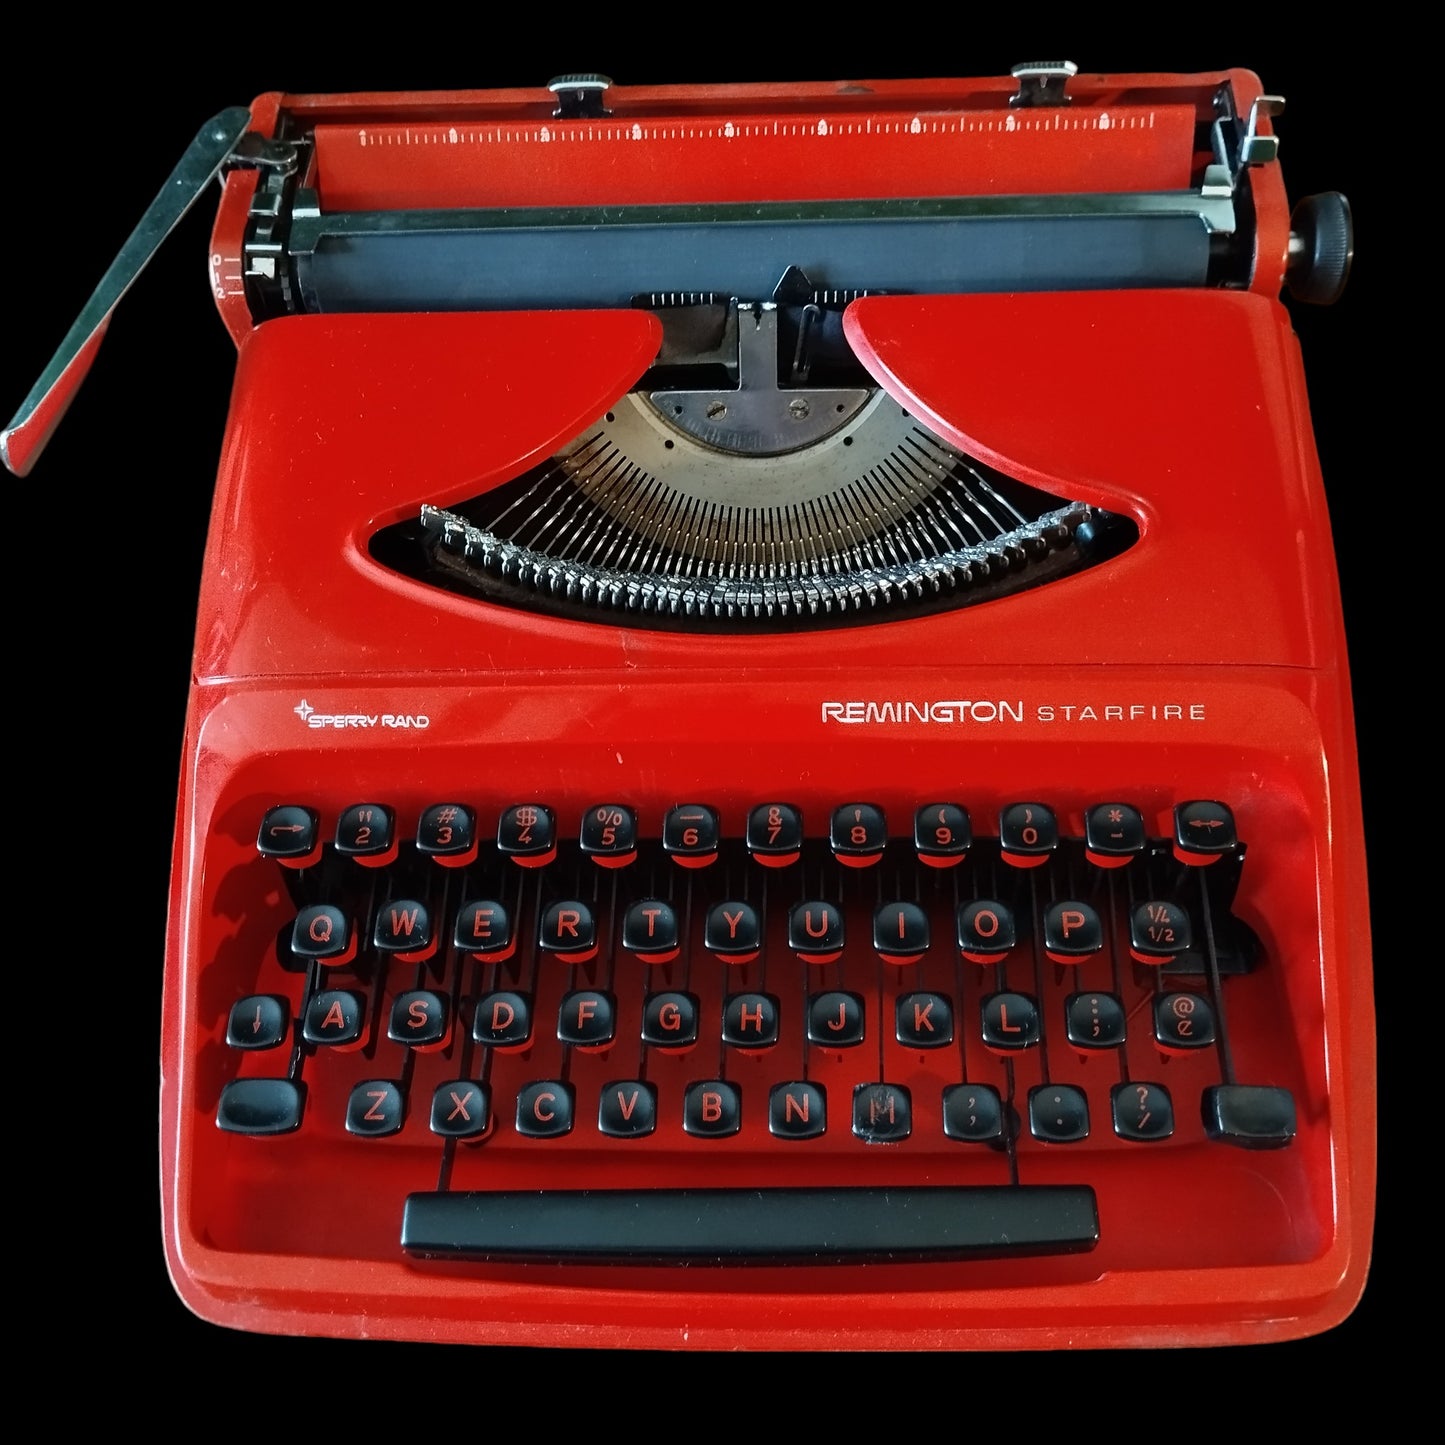 Image of Remington Starfire Sperry Rand Typewriter. Available at universaltypewritercompany.in